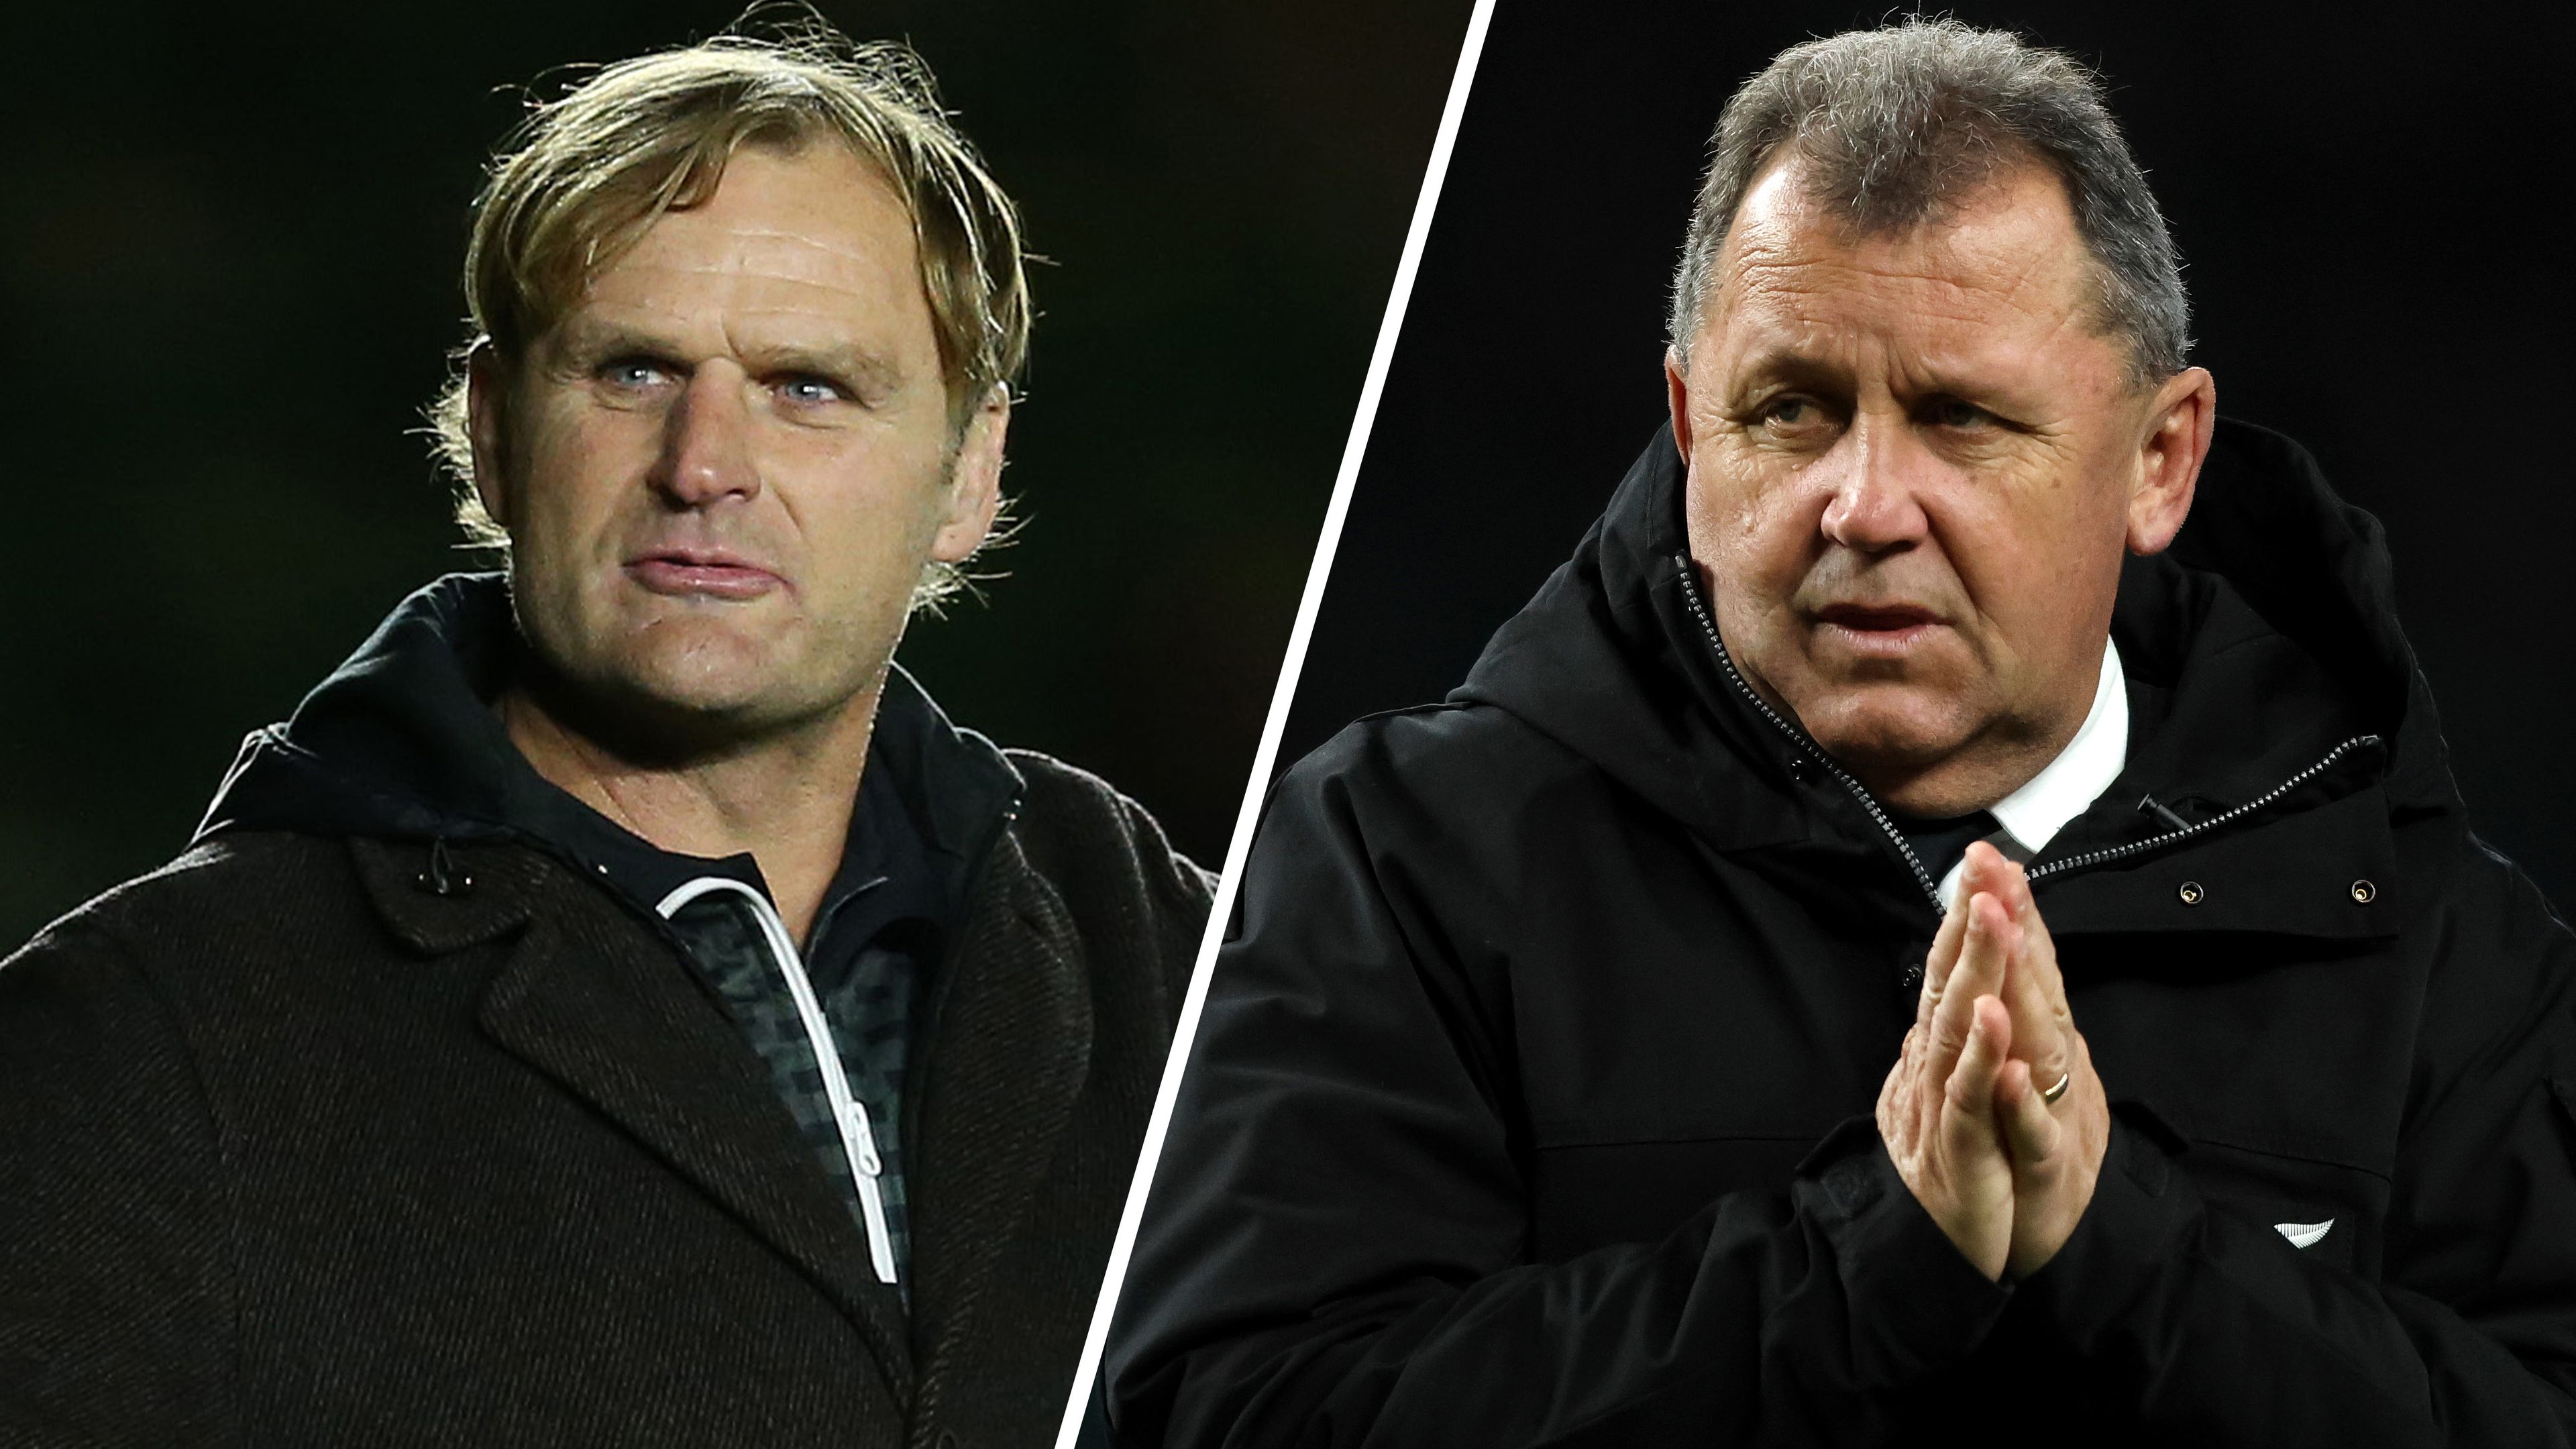 New Zealand the 'laughing stock' of world rugby amid All Blacks coaching saga